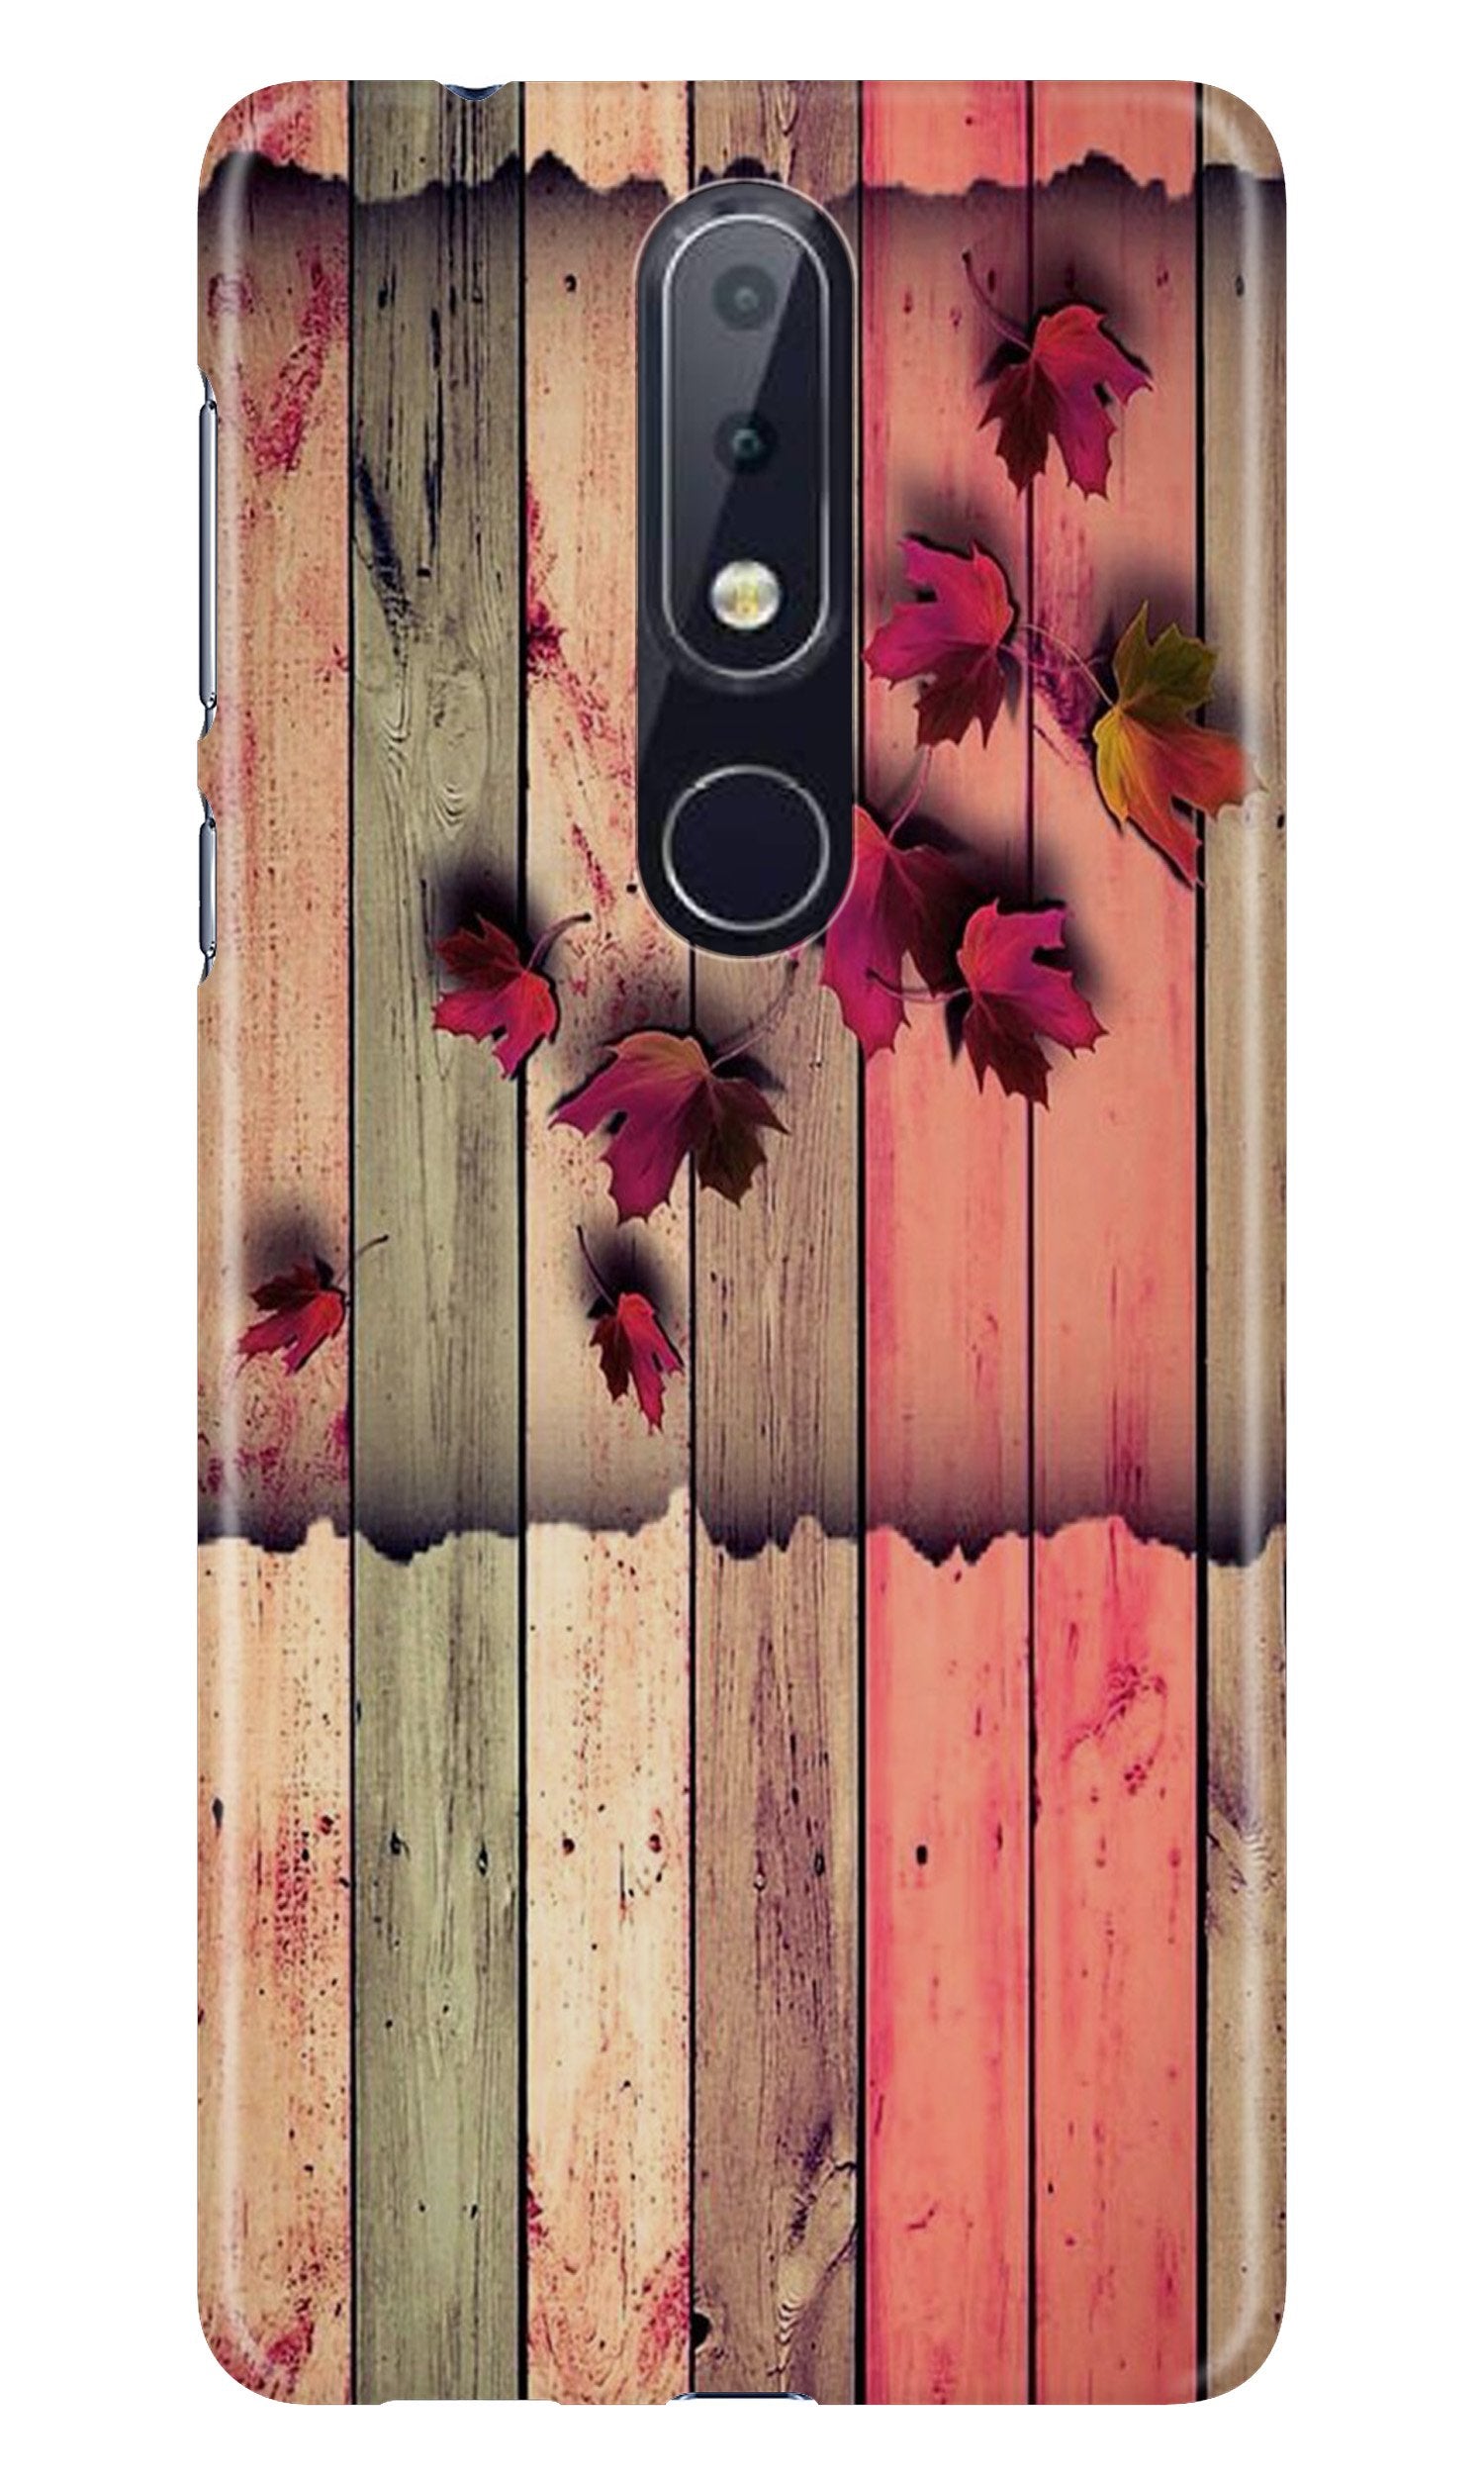 Wooden look2 Case for Nokia 6.1 Plus